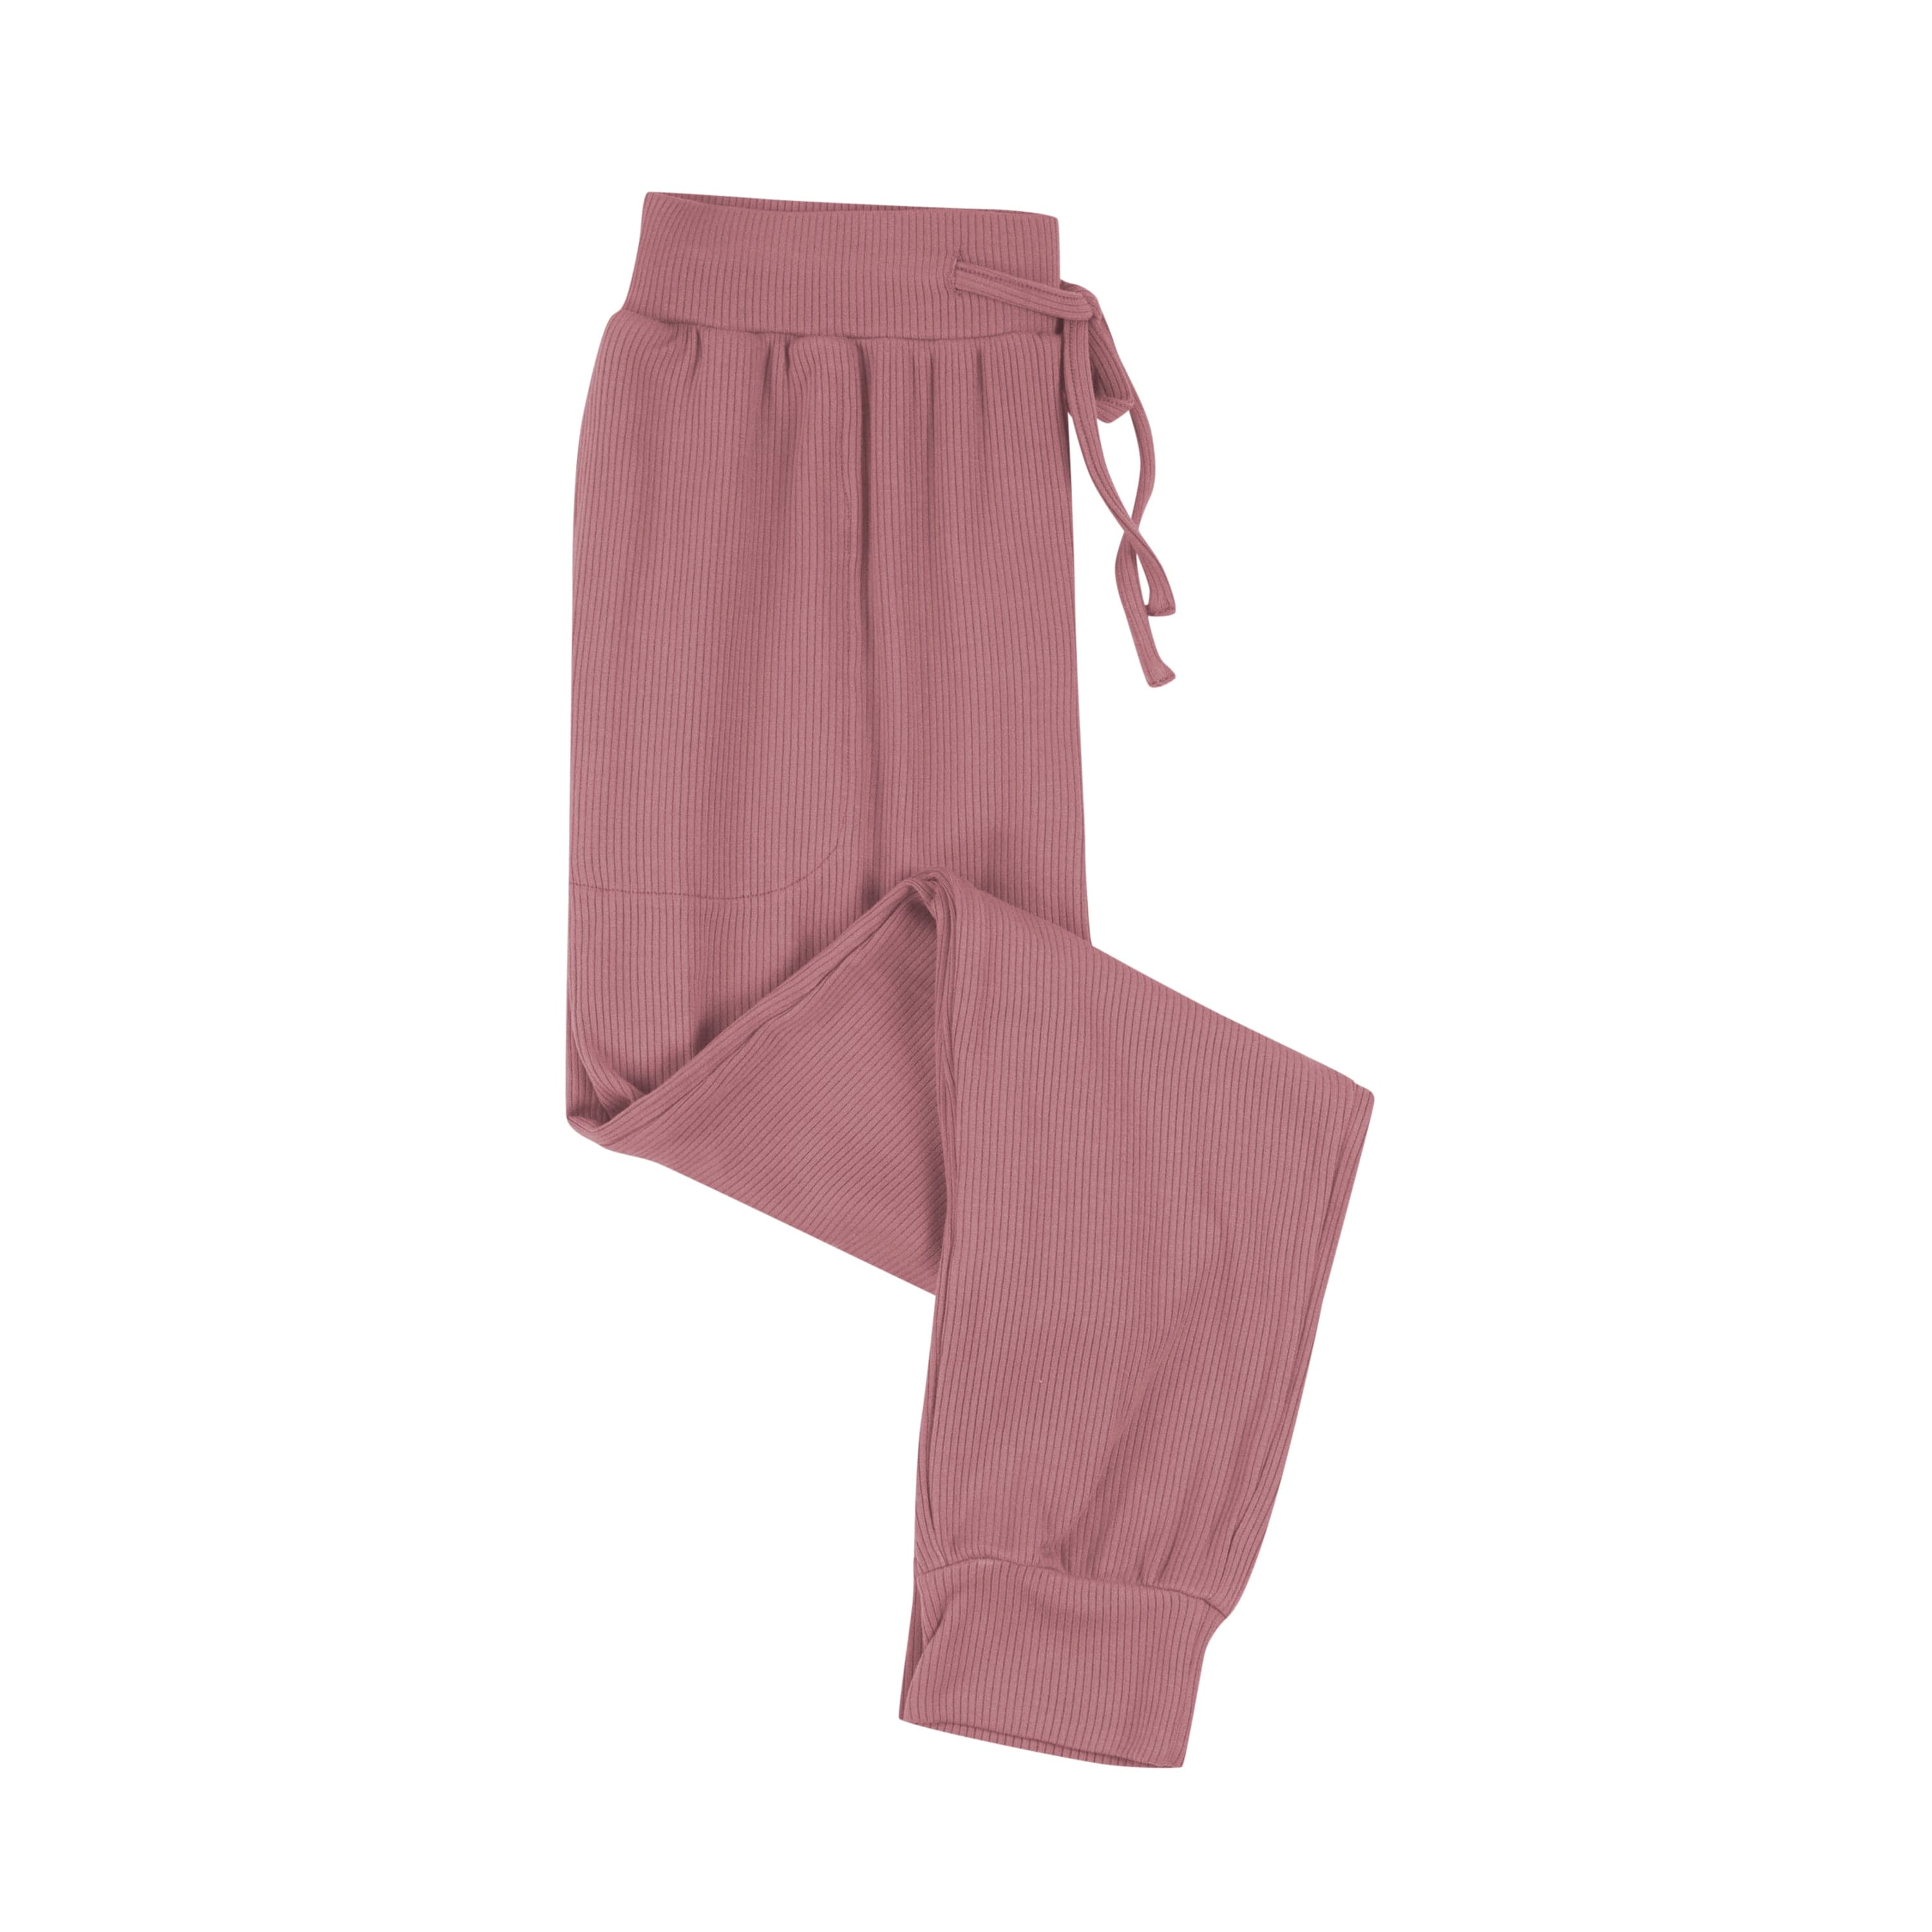 Kyte Baby Women's Ribbed Jogger Pant Women's Ribbed Jogger Pant in Dusty Rose